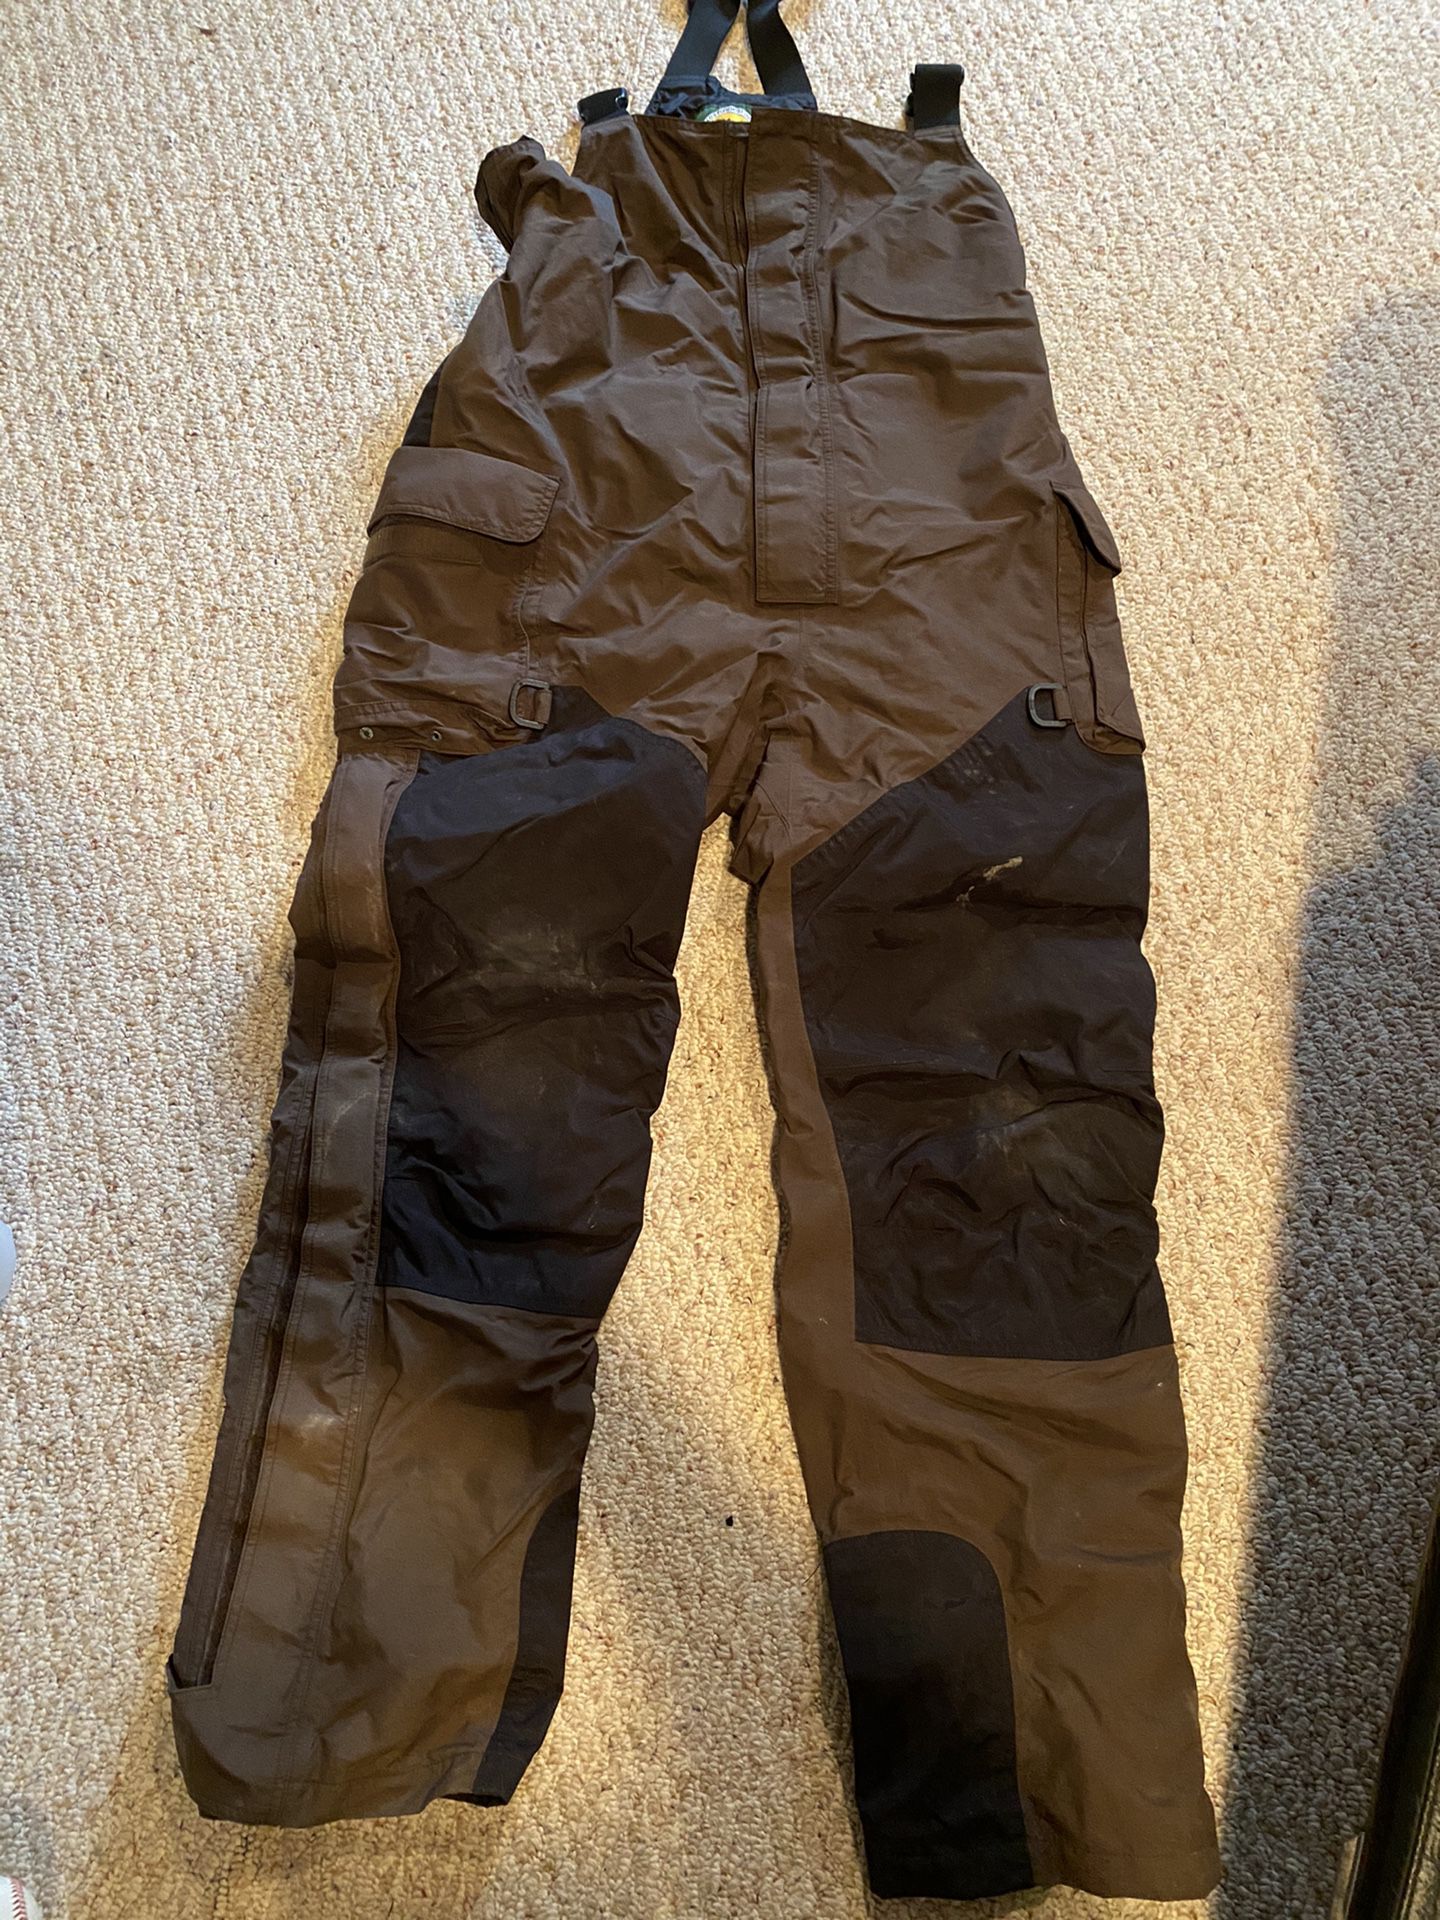 Cabelas guide gear fishing pants Large Tall